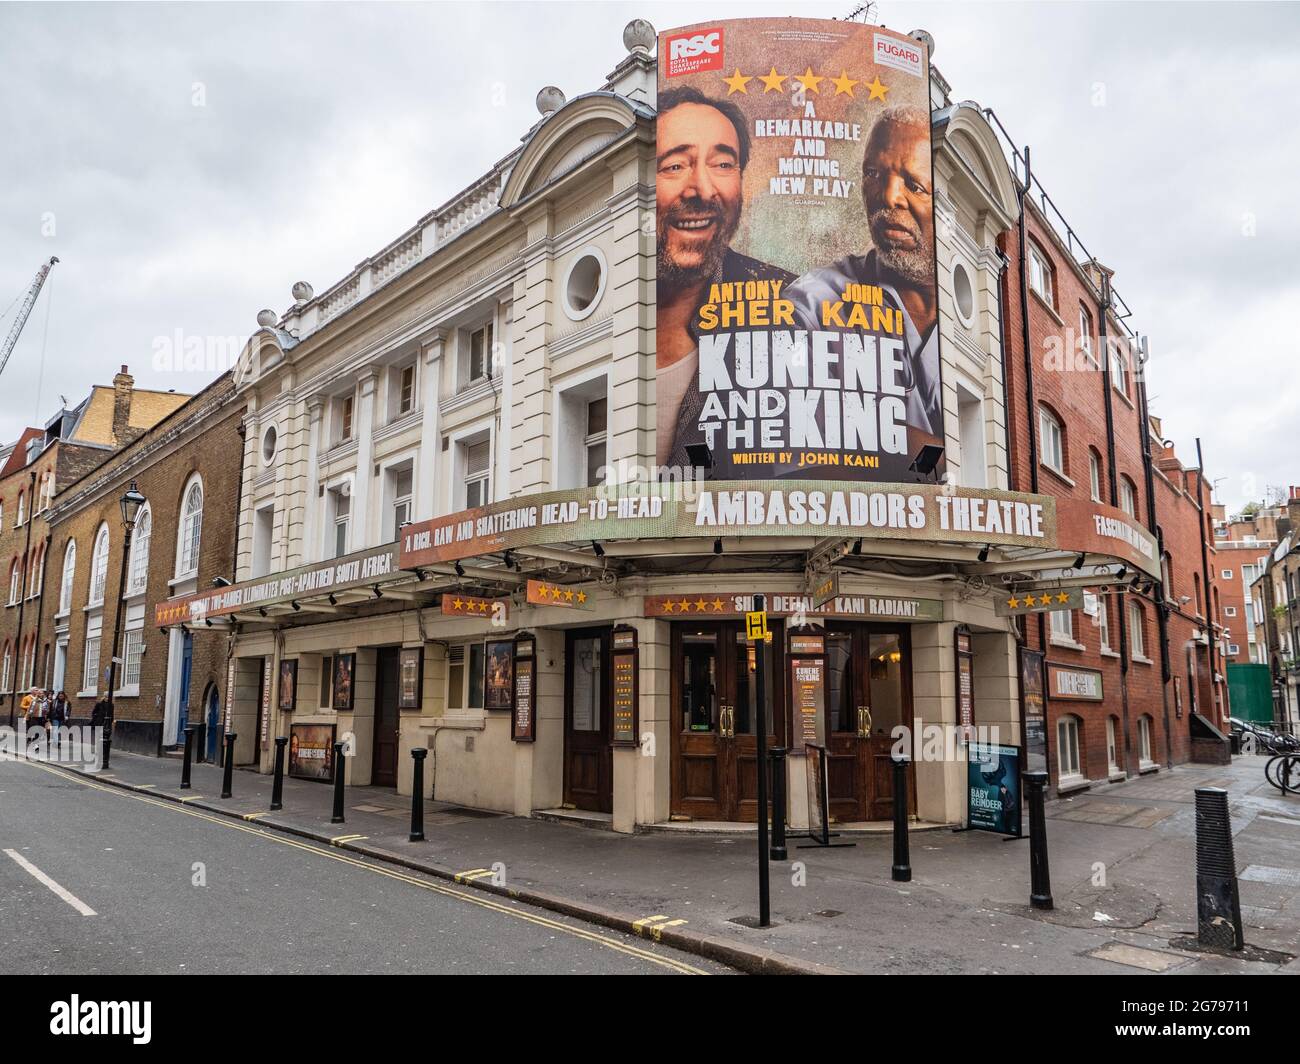 The Amabassadors Theatre in London's West End theatre district with the RSC production of Kunene and the King running with Antony Sher and John Kani. Stock Photo